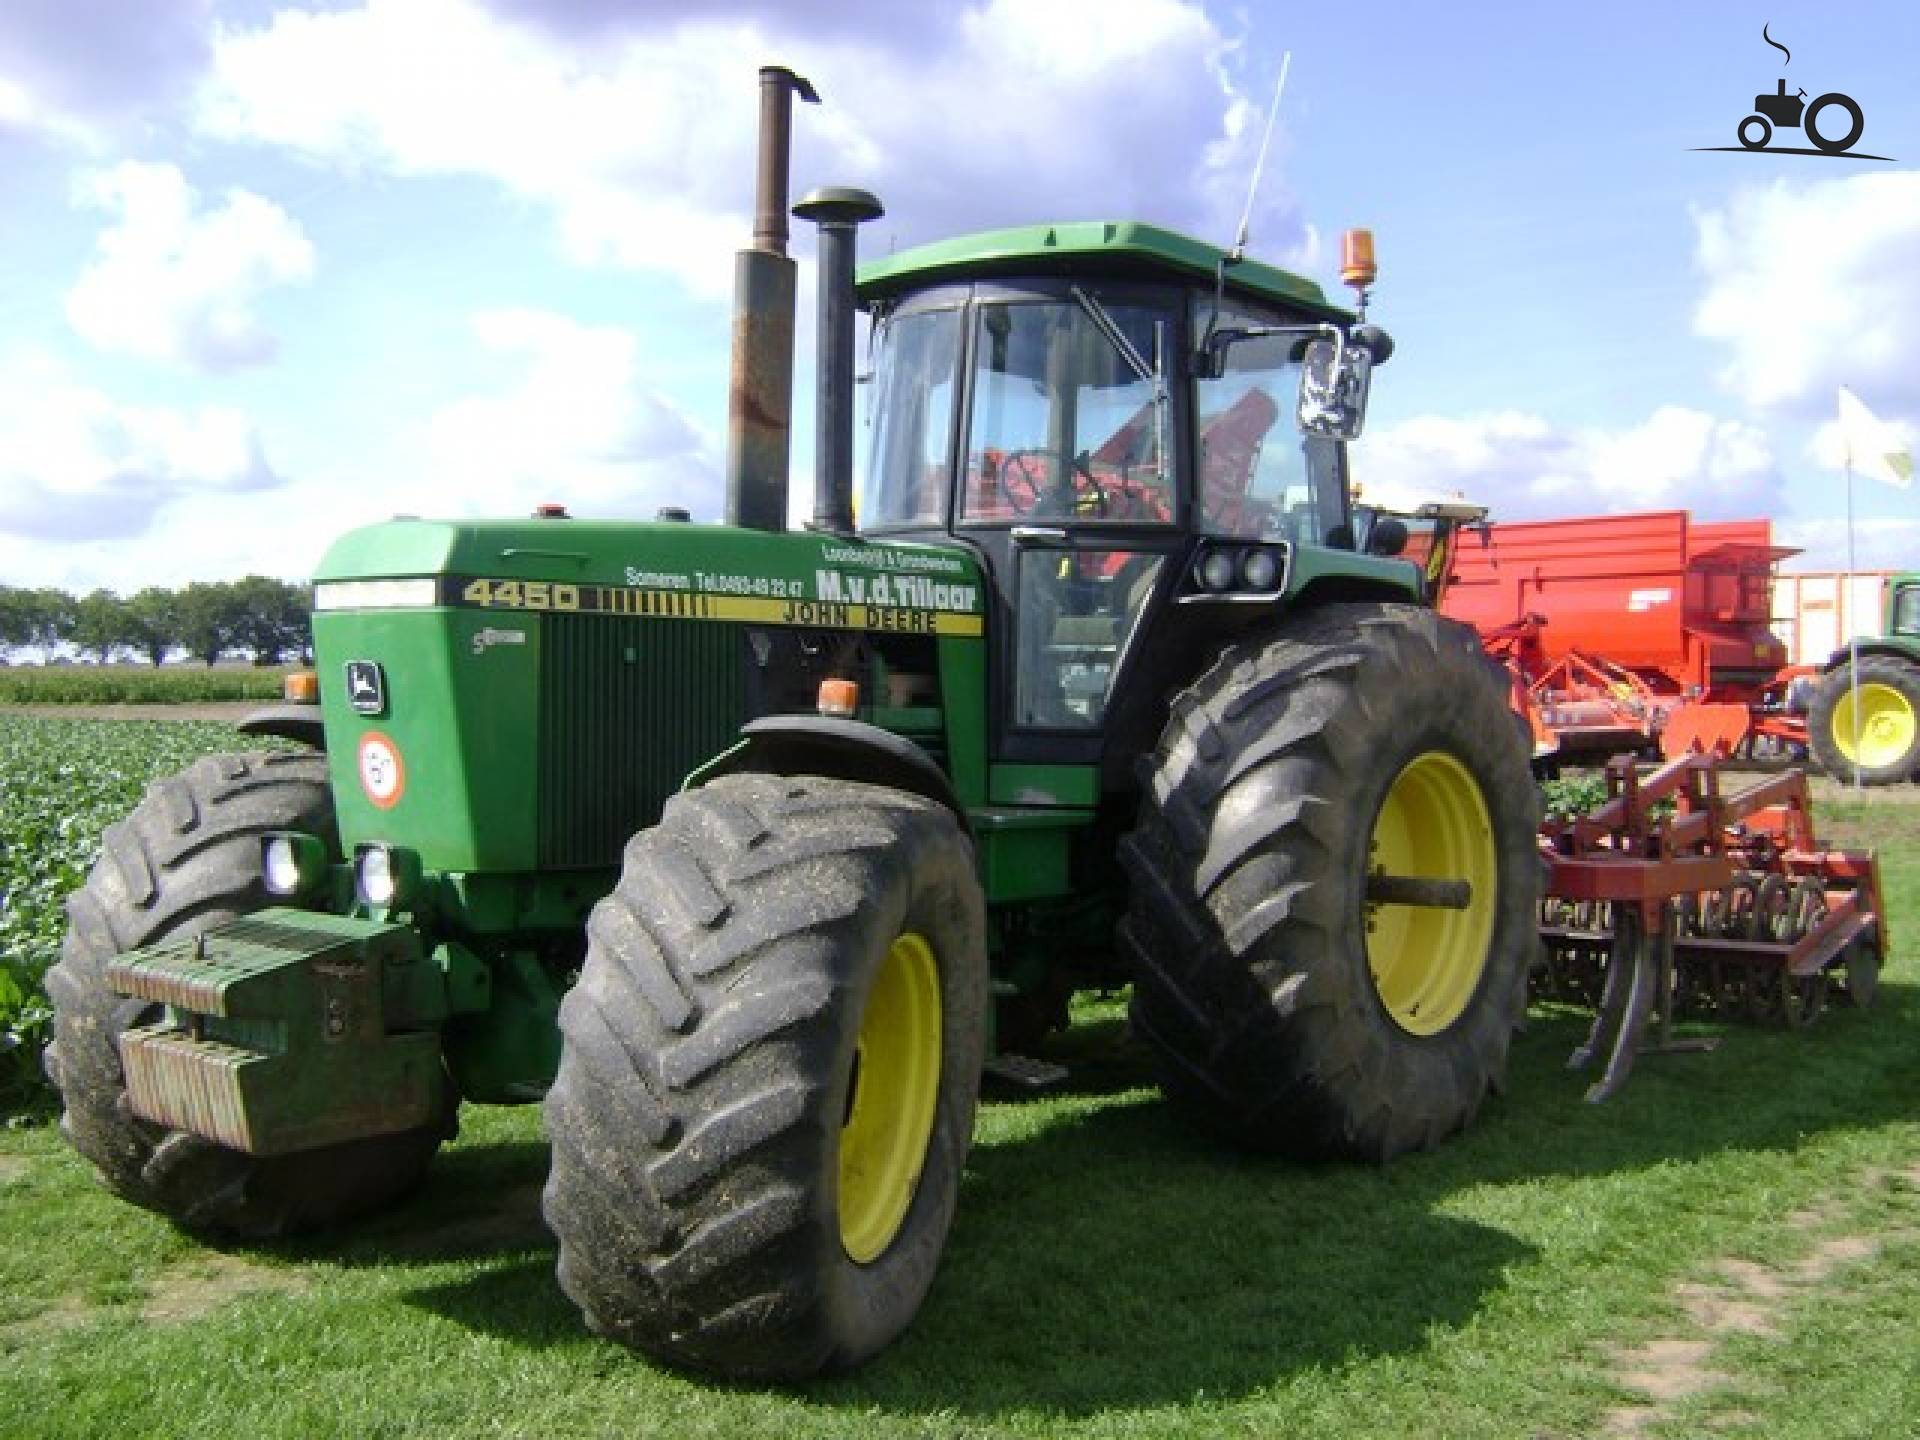 John Deere 4450 from casefahrer Busy with poseren.